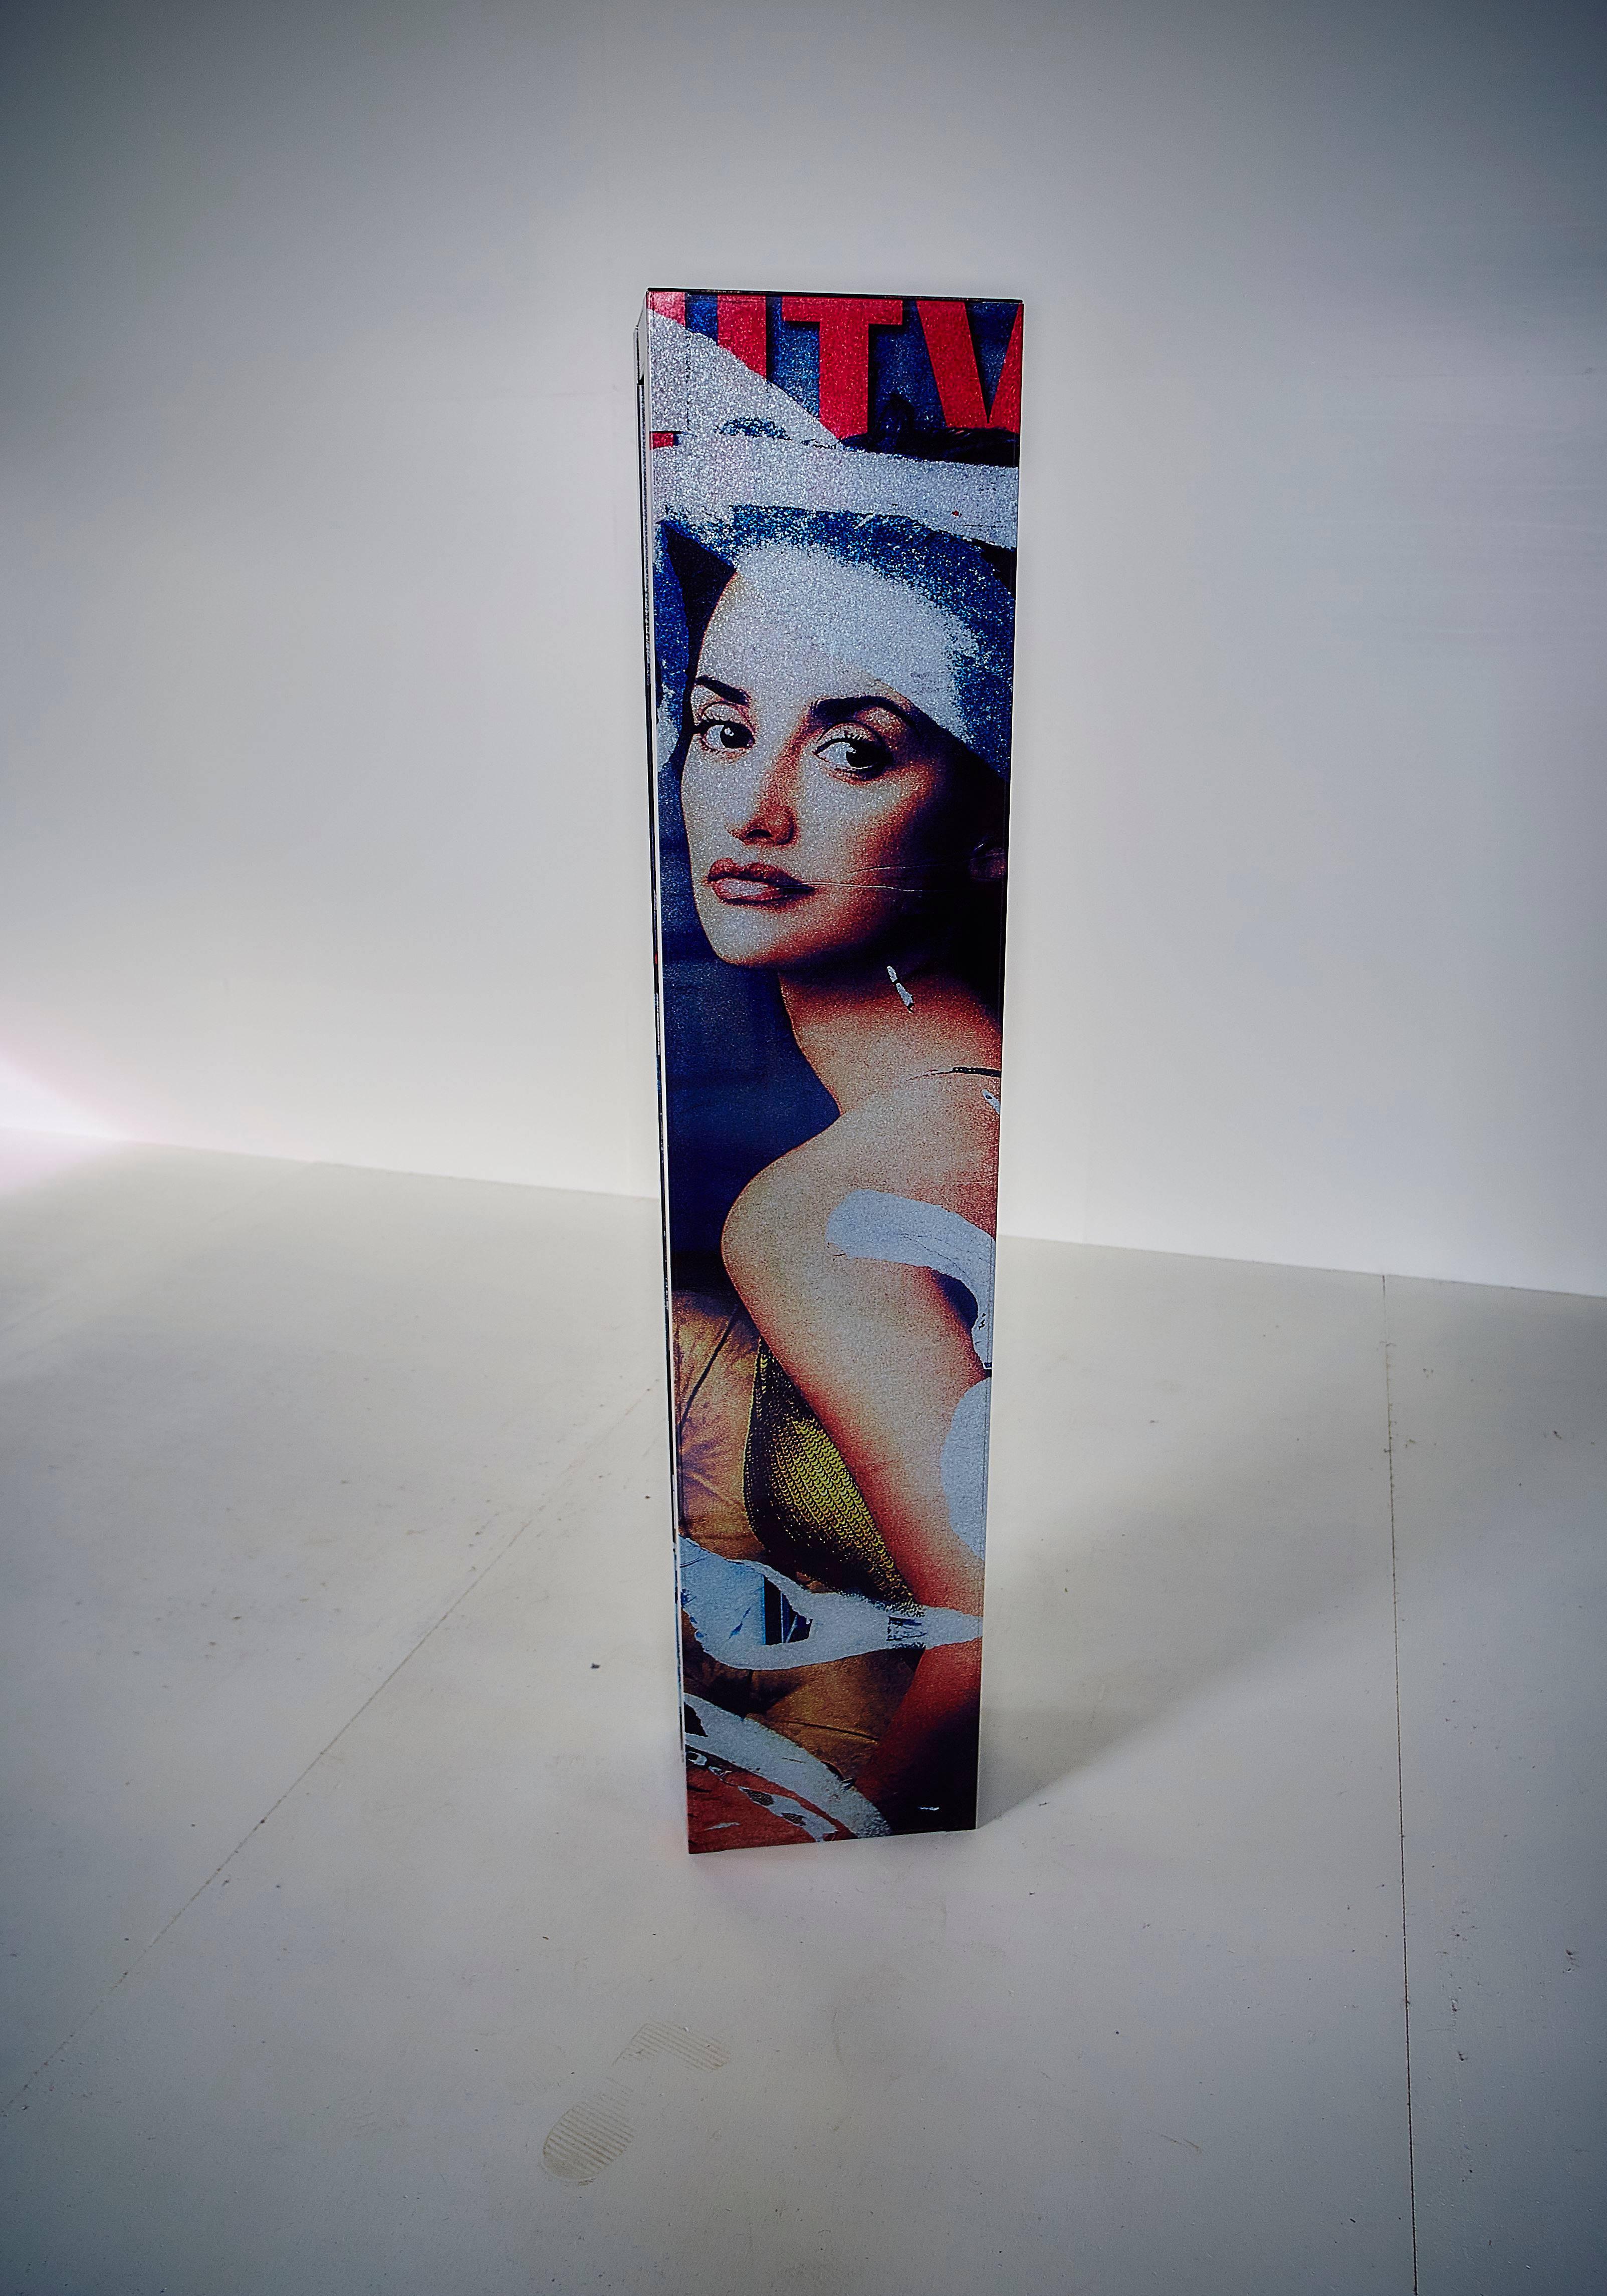 Mimmo Rotella Furniture
Designer: Mimmo Rotella & Marco Ferrari
Bookcase (cdcase) ''Penelope''
Limited Edition of 5 pieces. Number 04/05.
Zerodesign Atelier 
Date of Manufacture: 14/07/2005
Sell with the ID of Zerodesign compagny.

Some of